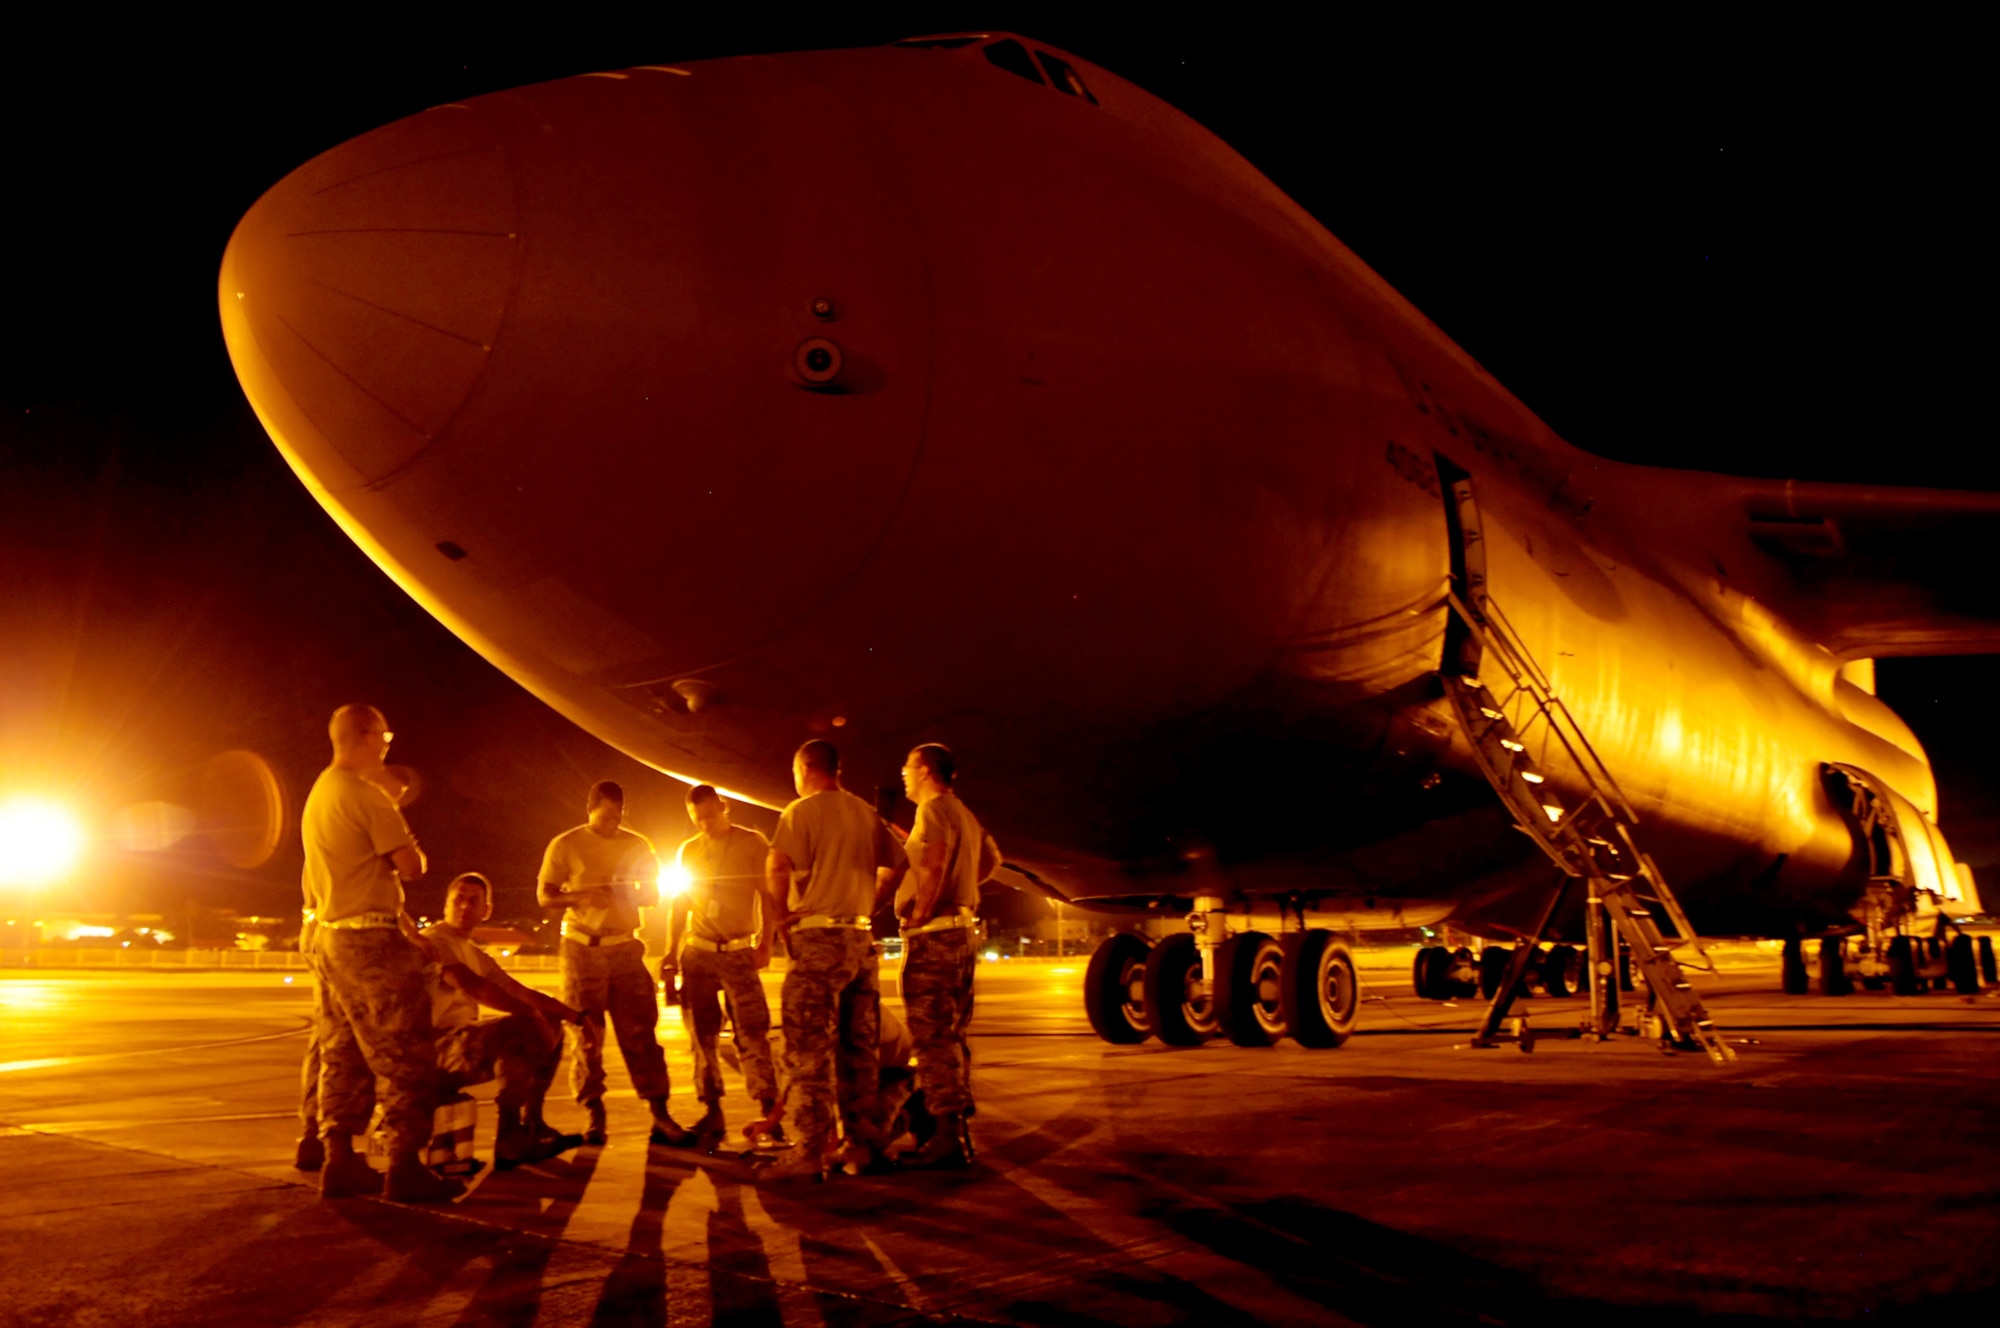 ANDERSEN AIR FORCE BASE, Guam – Airmen from the 734th Air Mobility Squadron maintenance team gather and discuss the plan of action in using aircraft jacks to lift a C-5 Galaxy on the flightline here, Sept. 11. The 734th AMS maintenance flight manages all en route maintenance production activities. The C-5 Galaxy carried cargo in support of Exercise Valiant Shield 2012. (U.S. Air Force photo by Airman 1st Class Marianique Santos/Released)